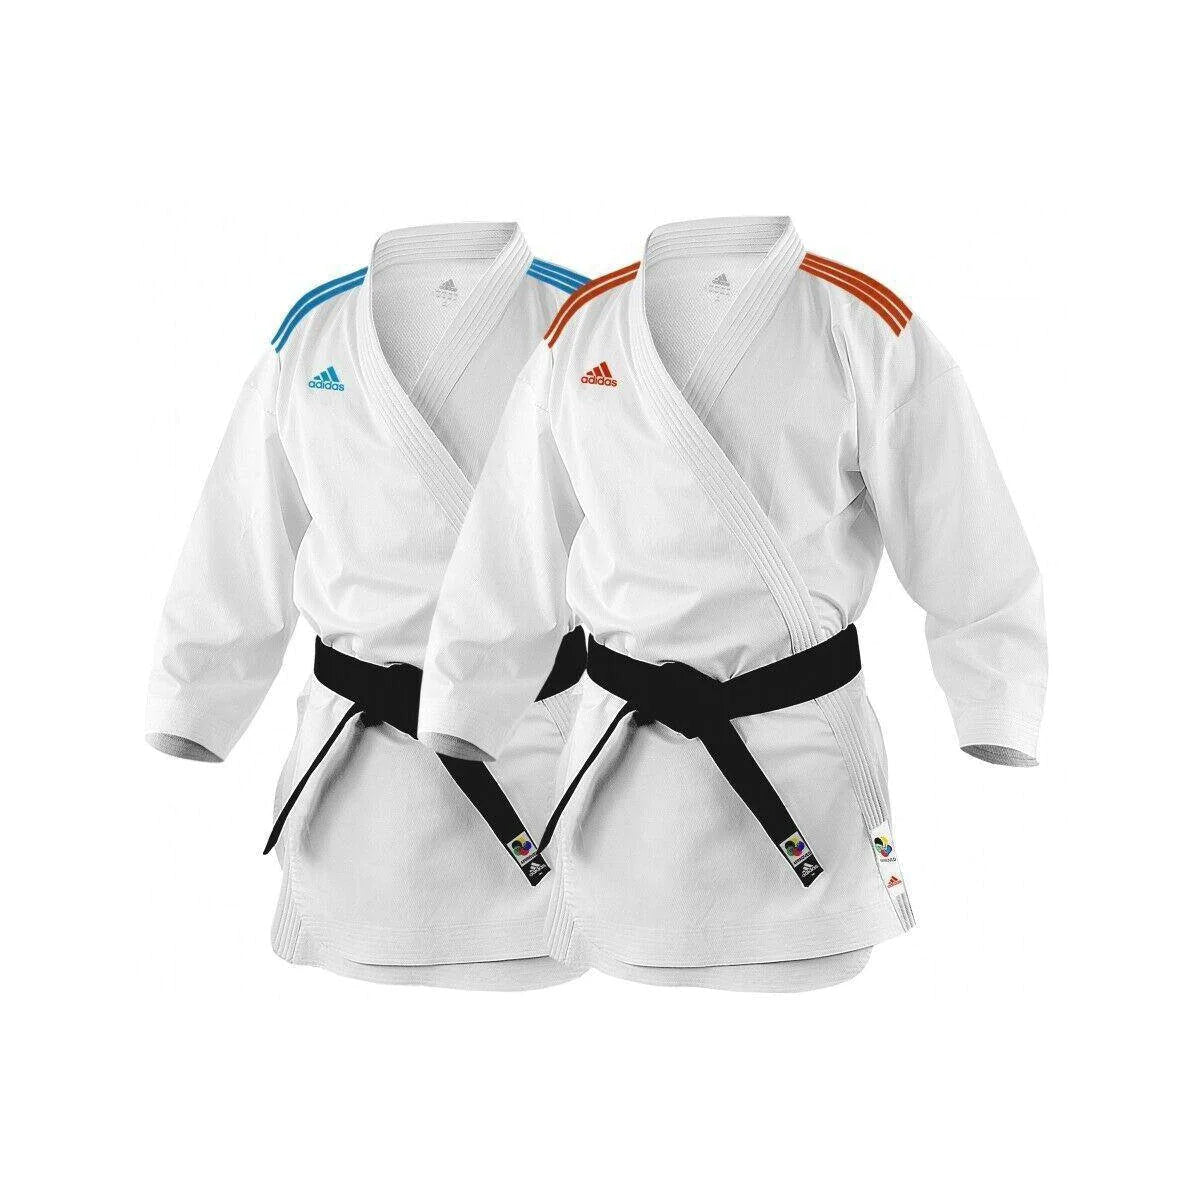 Buying A Karate Uniform (Gi) guide to choosing the correct suit.